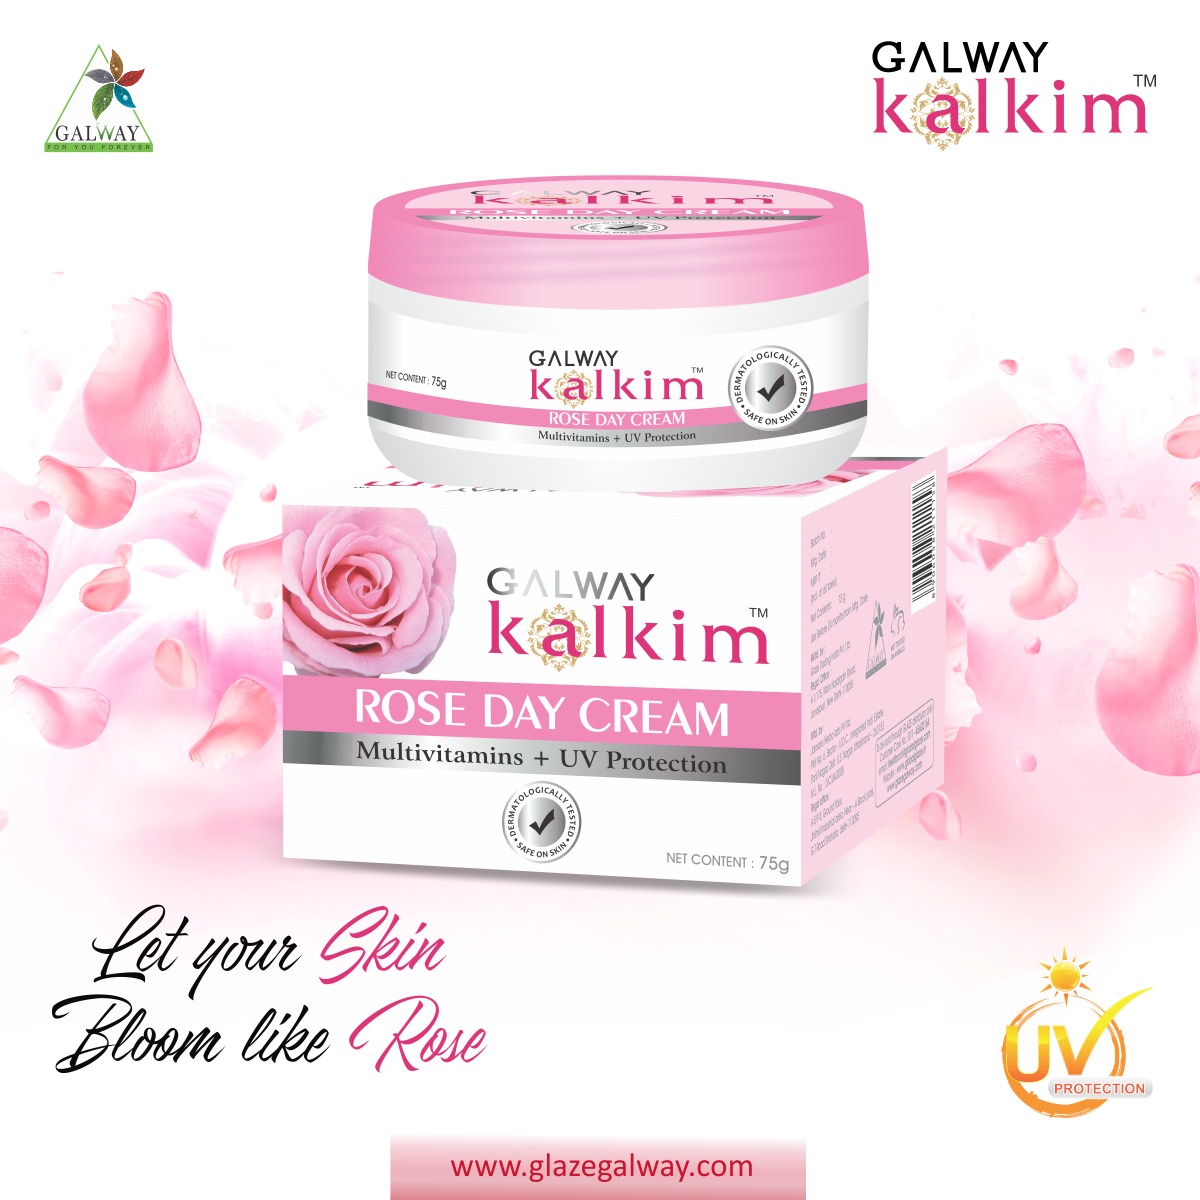 Galway Kalkim Rose Day Cream contains fresh rose extract so that you get a soft skin like rose with its fragrance every moment.
Buy Now...
glazegalway.com/face-care/rose…
#kalkim #roseday #cream #facecare #Galwaykart #roseday #roseextract #skincare #Fragrance